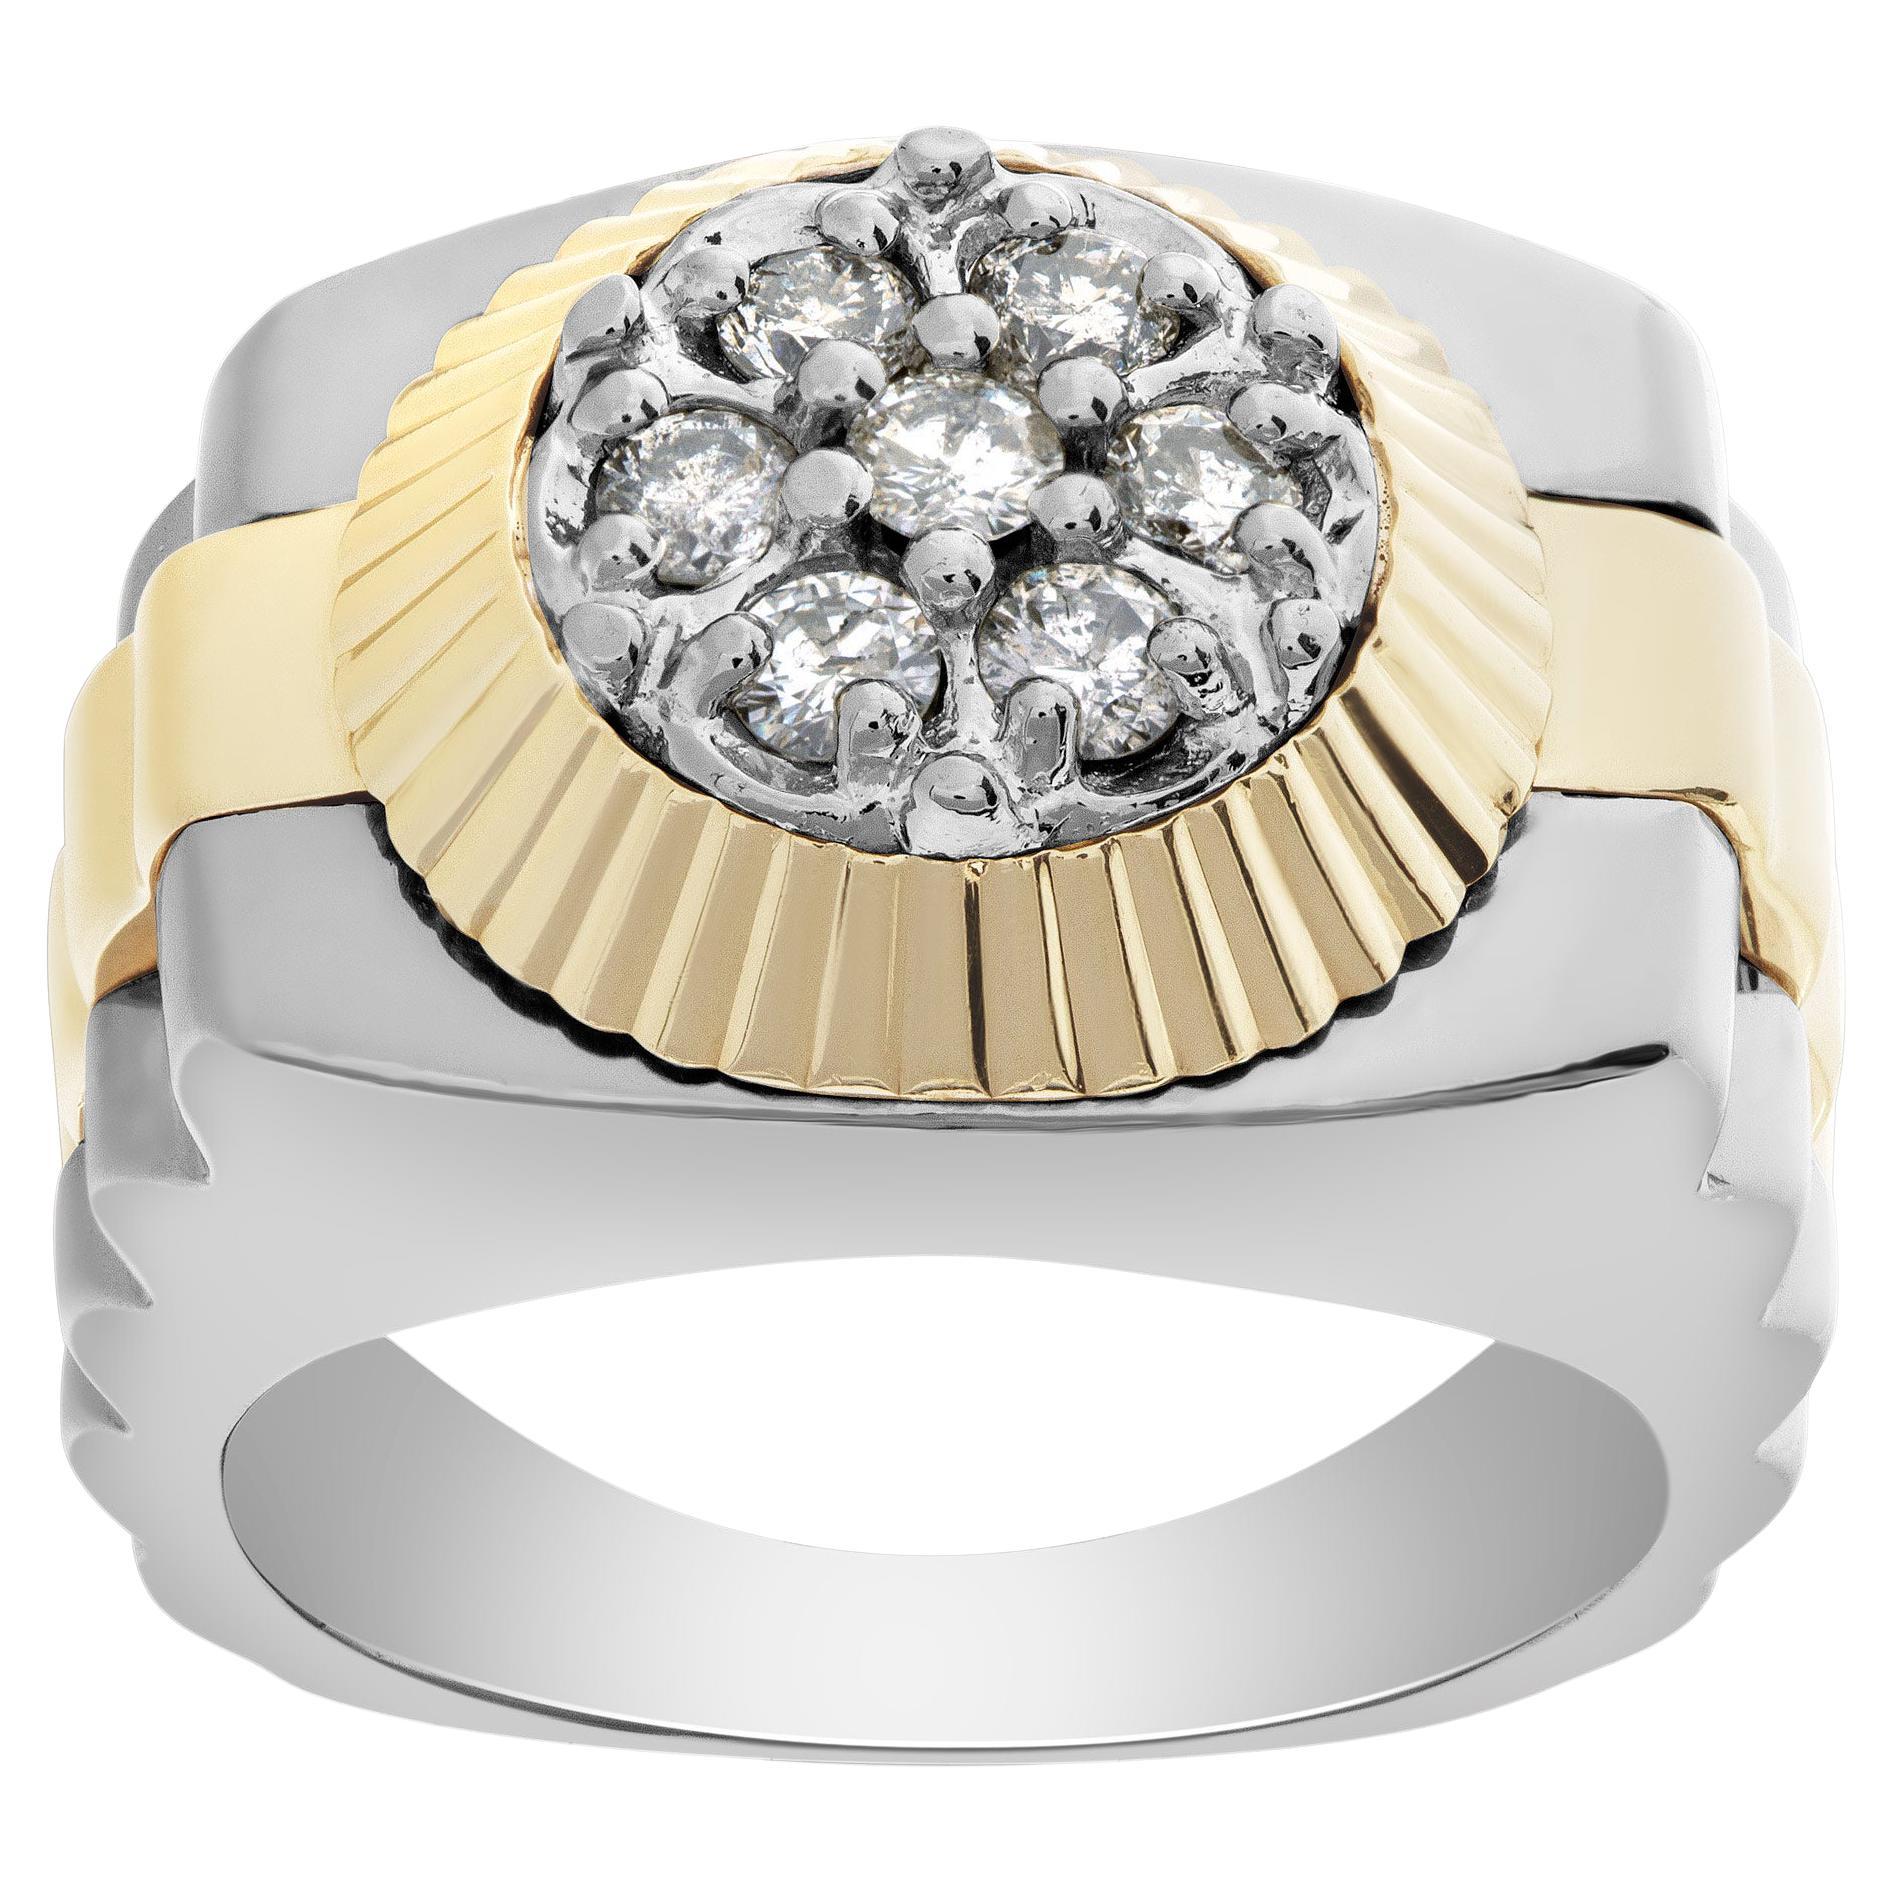 President Style Diamond Ring in 14k White and Yellow Gold For Sale